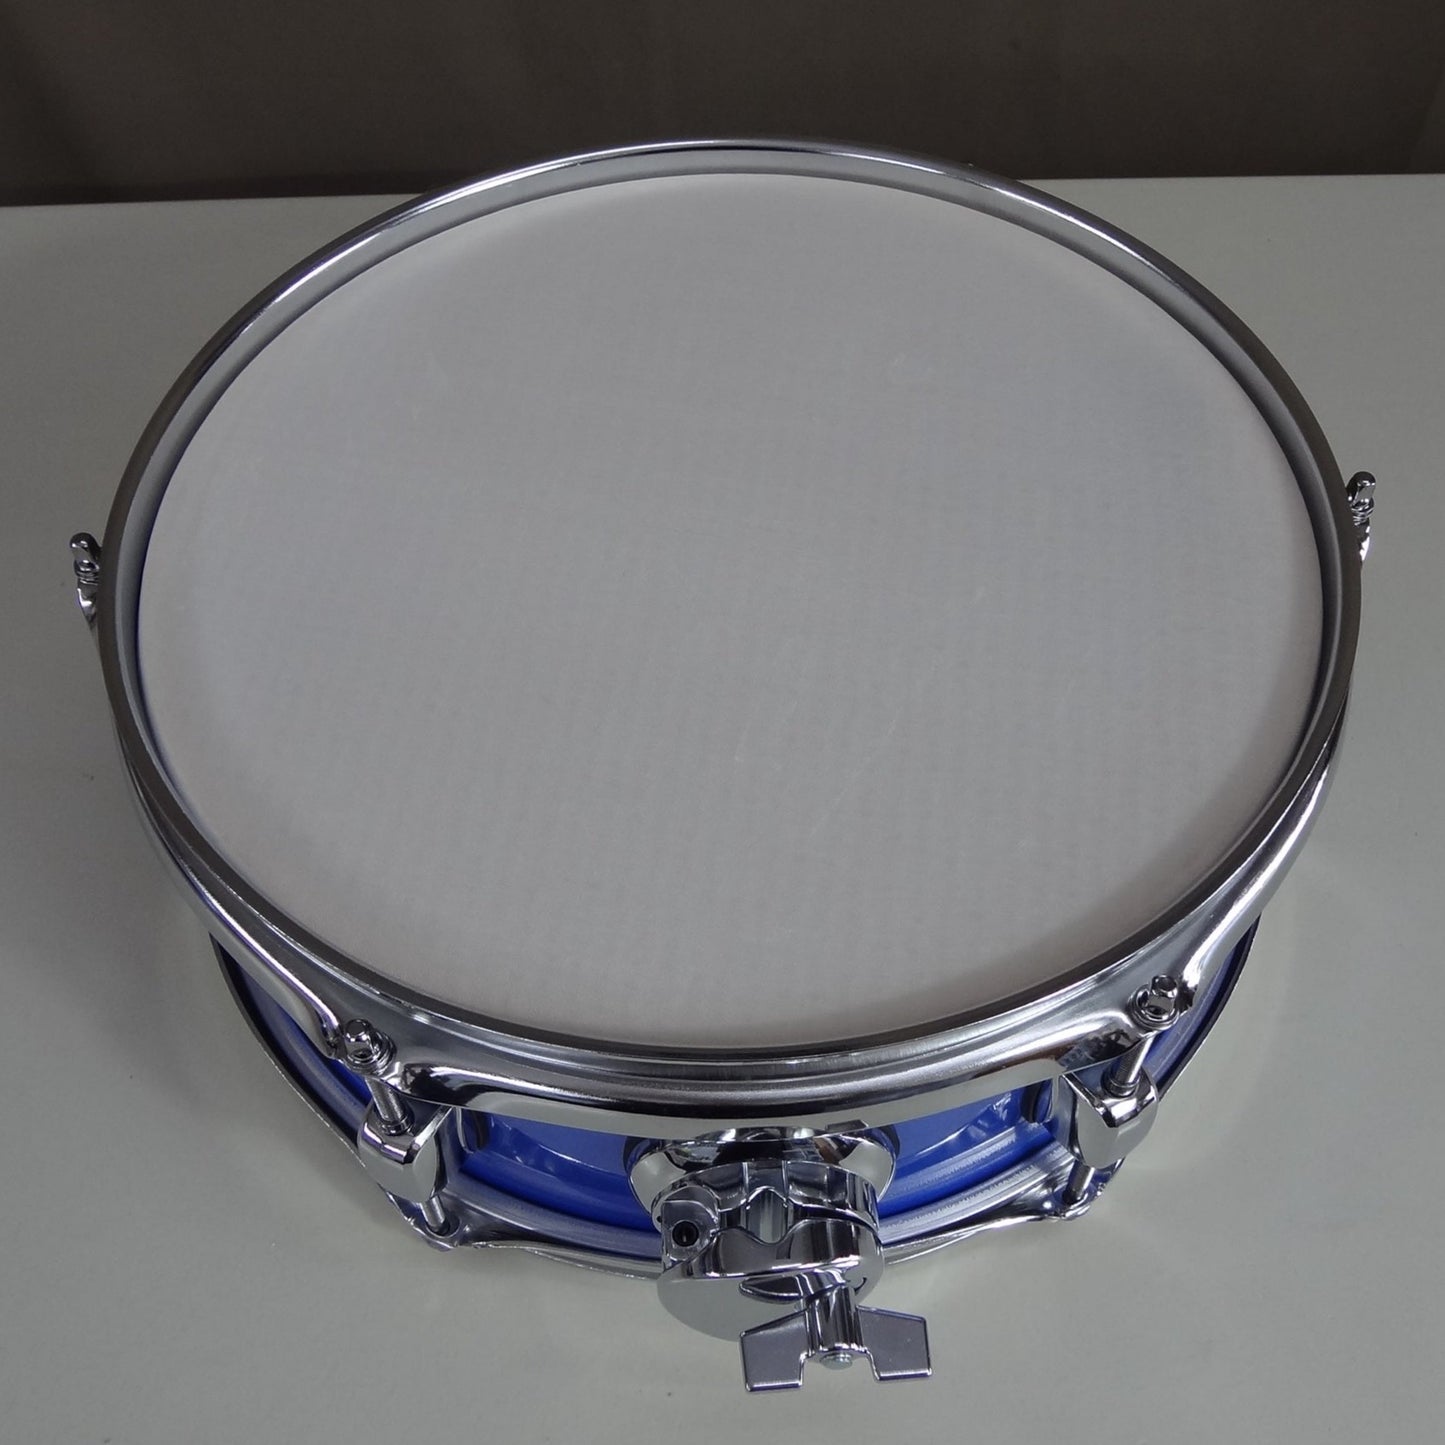 New 12 Inch Custom Electronic Snare Drum - Light Blue Sparkle